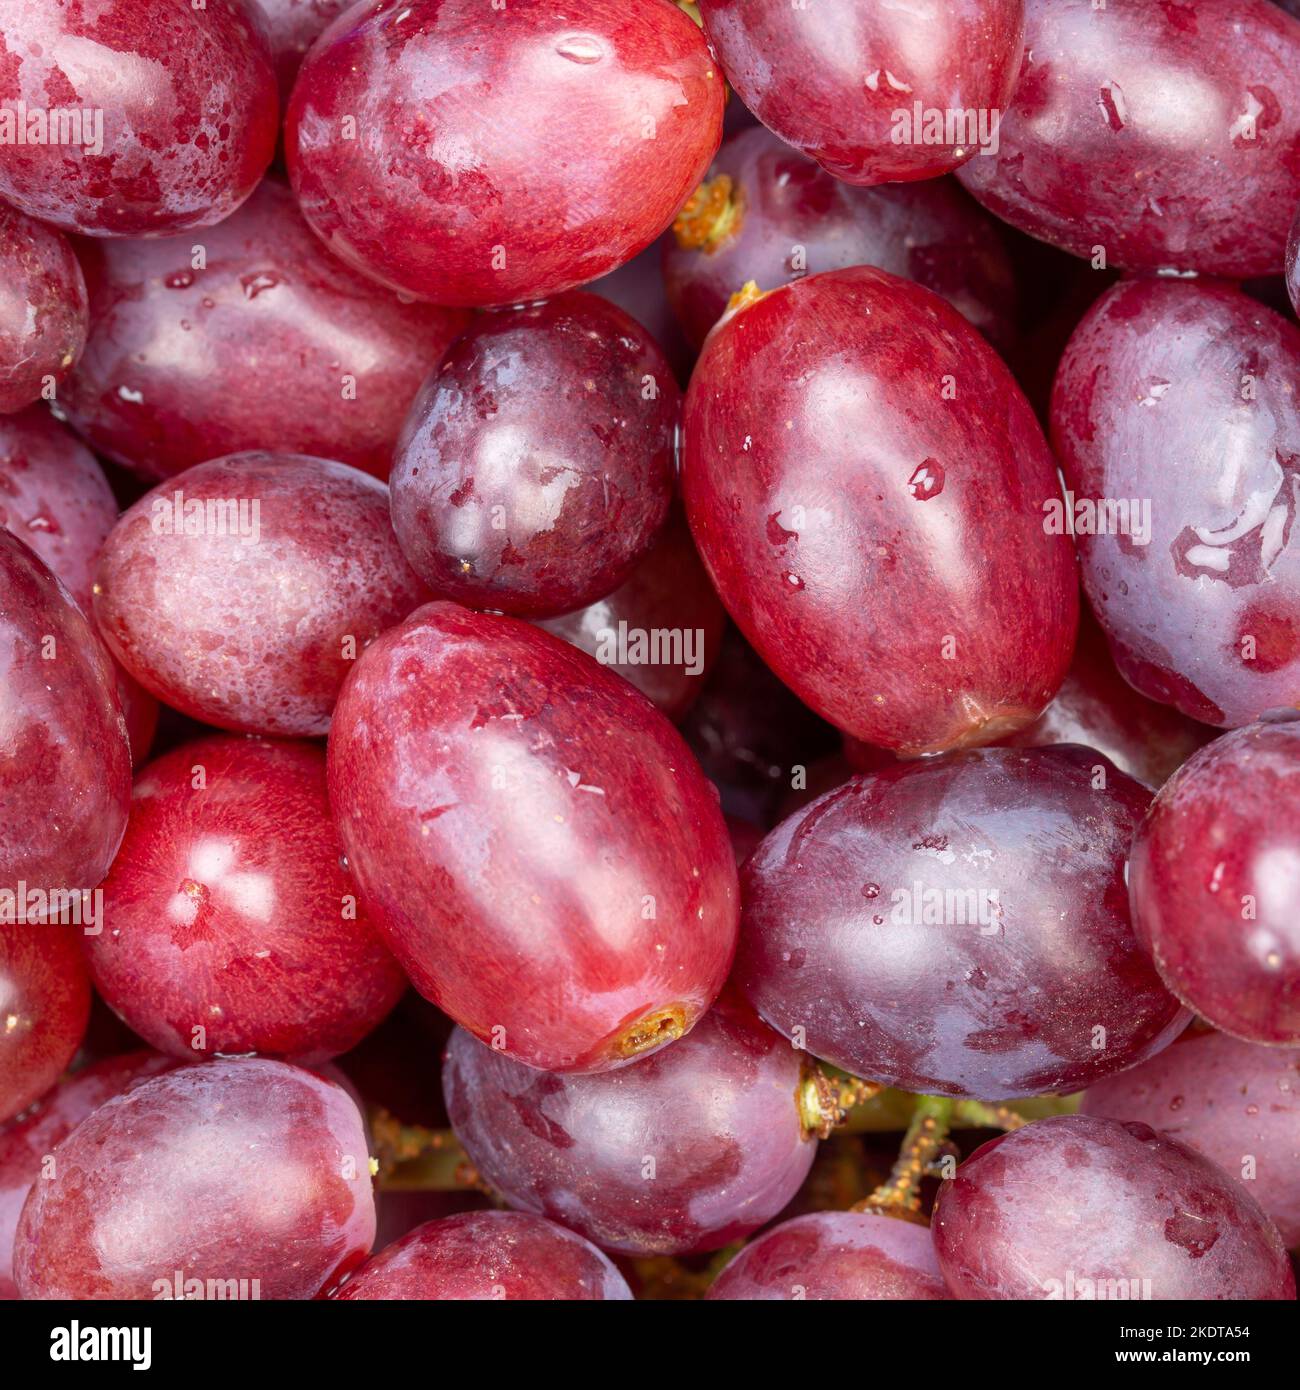 Stuttgart, Germany - January 12, 2022: Red Grapes Grapes Grape Fruit Fruit Background From Top Square In Stuttgart, Germany. Stock Photo